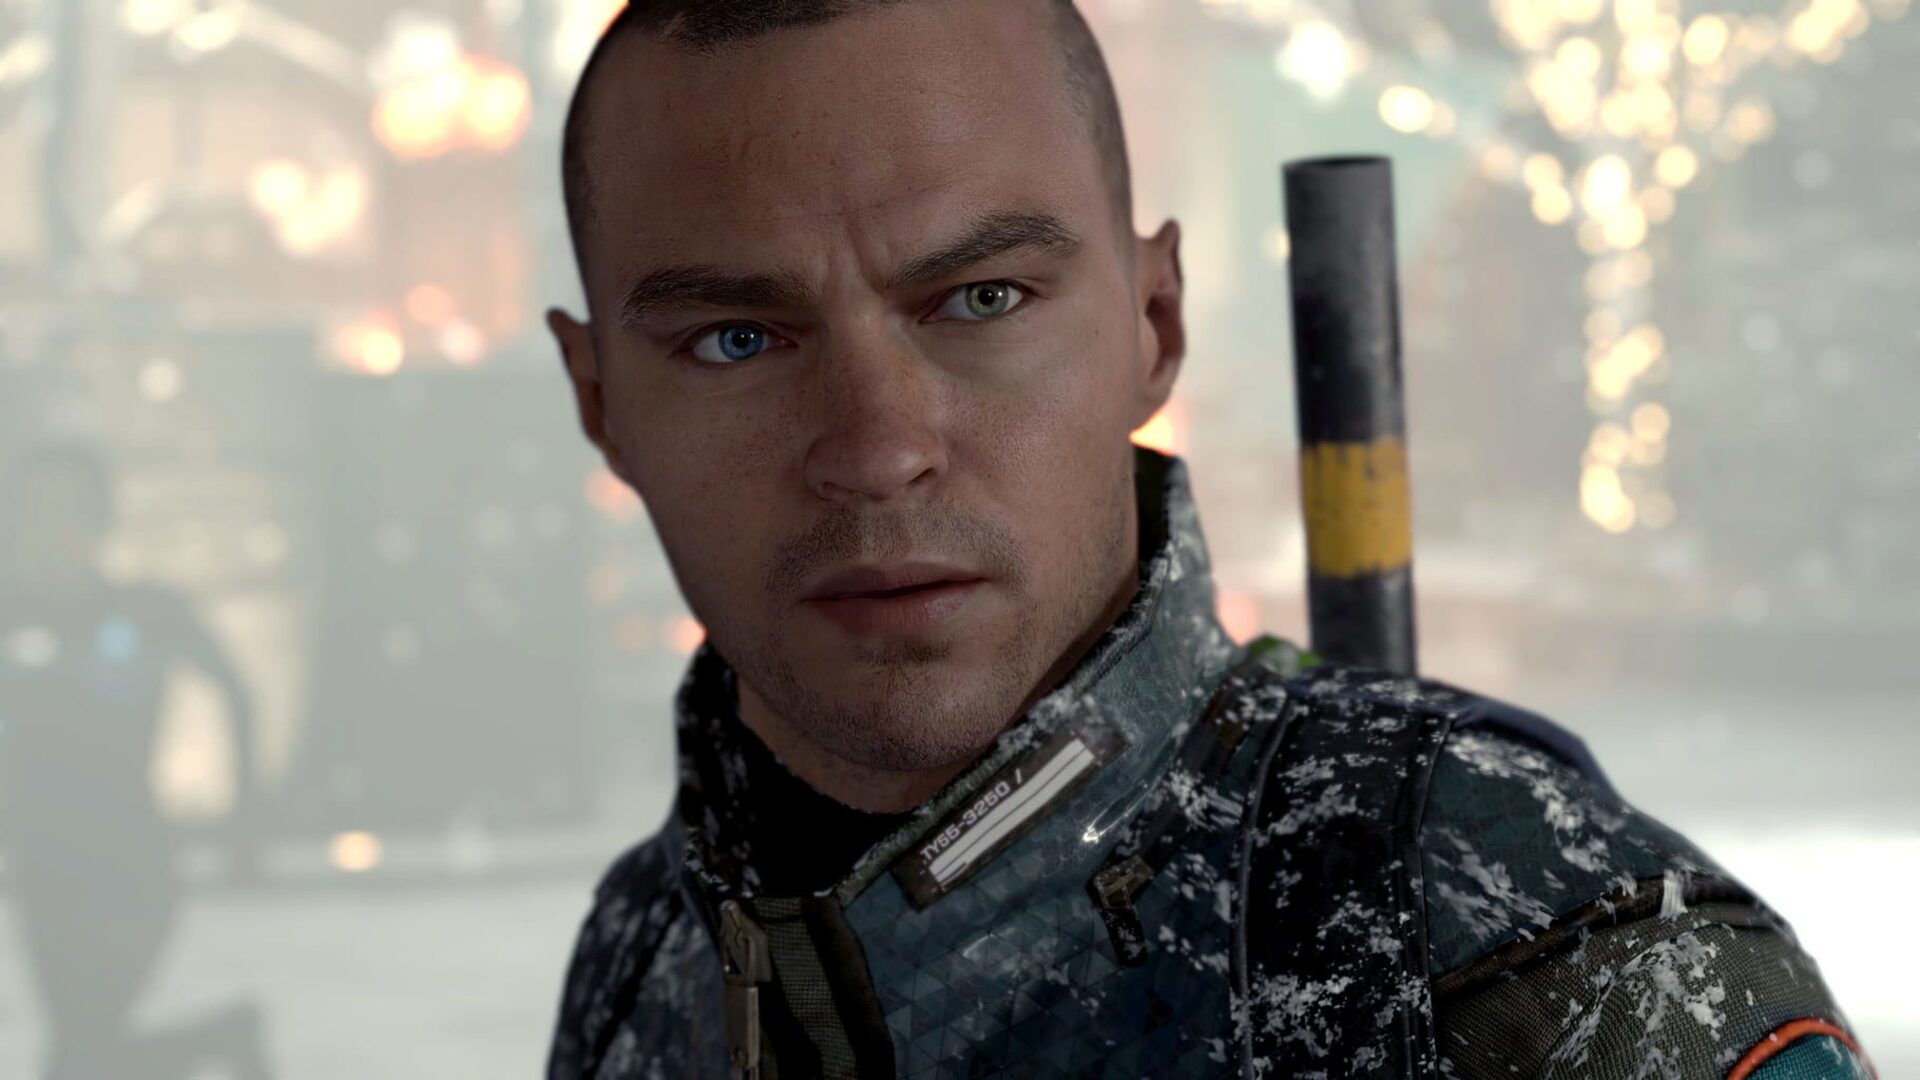 Detroit: Become Human Steam Key for PC - Buy now